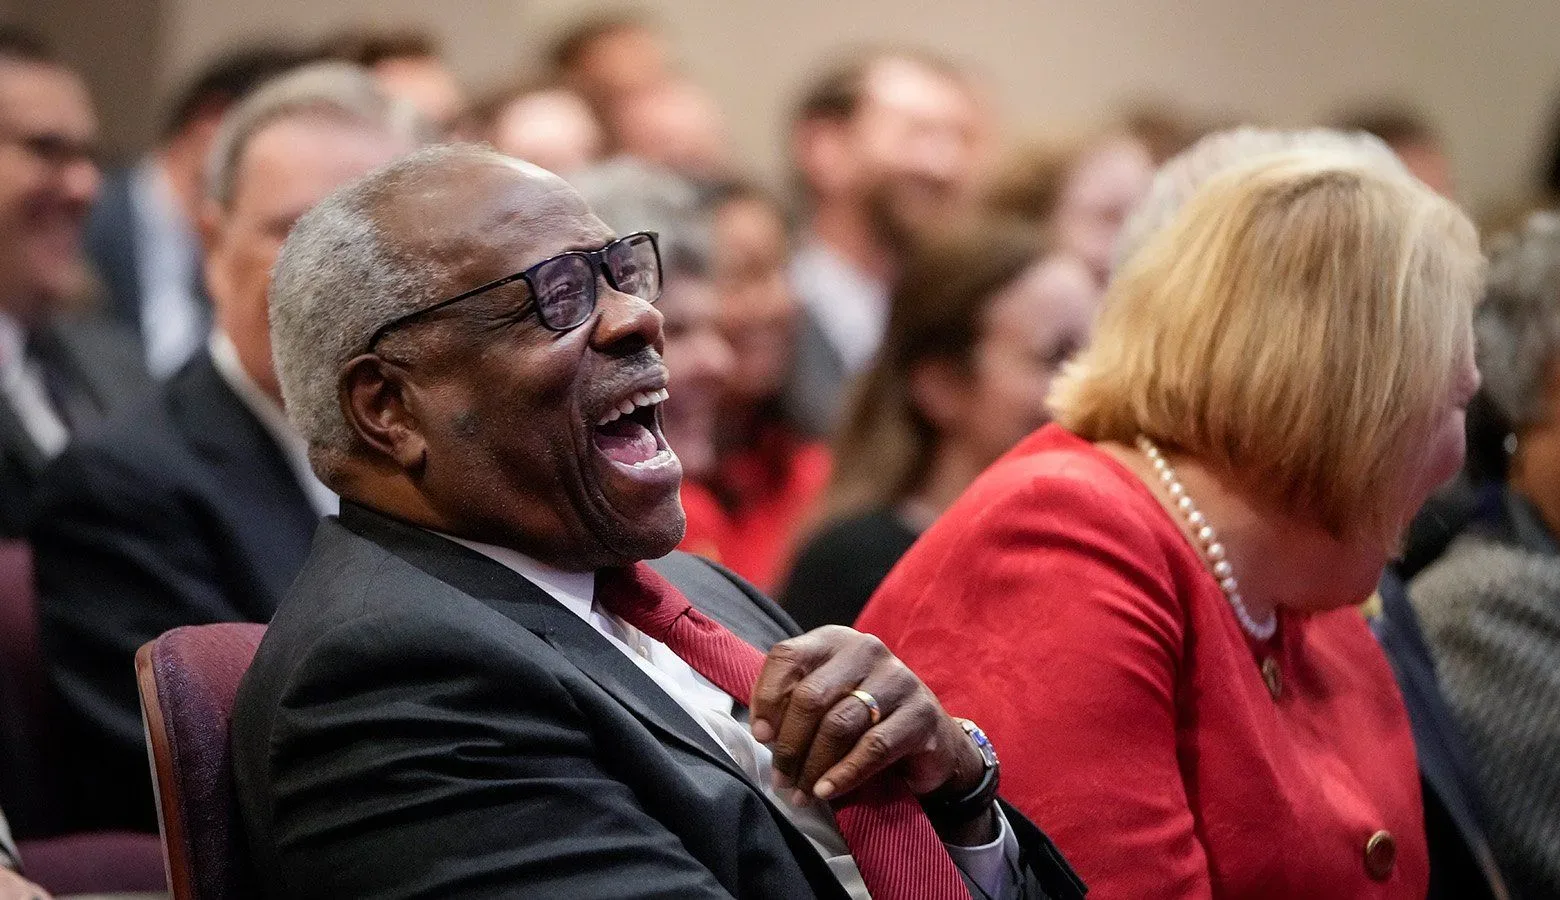 belongs-to-billionaire-clarence-thomas-butt-of-jokes-at-annual-dc-dinner